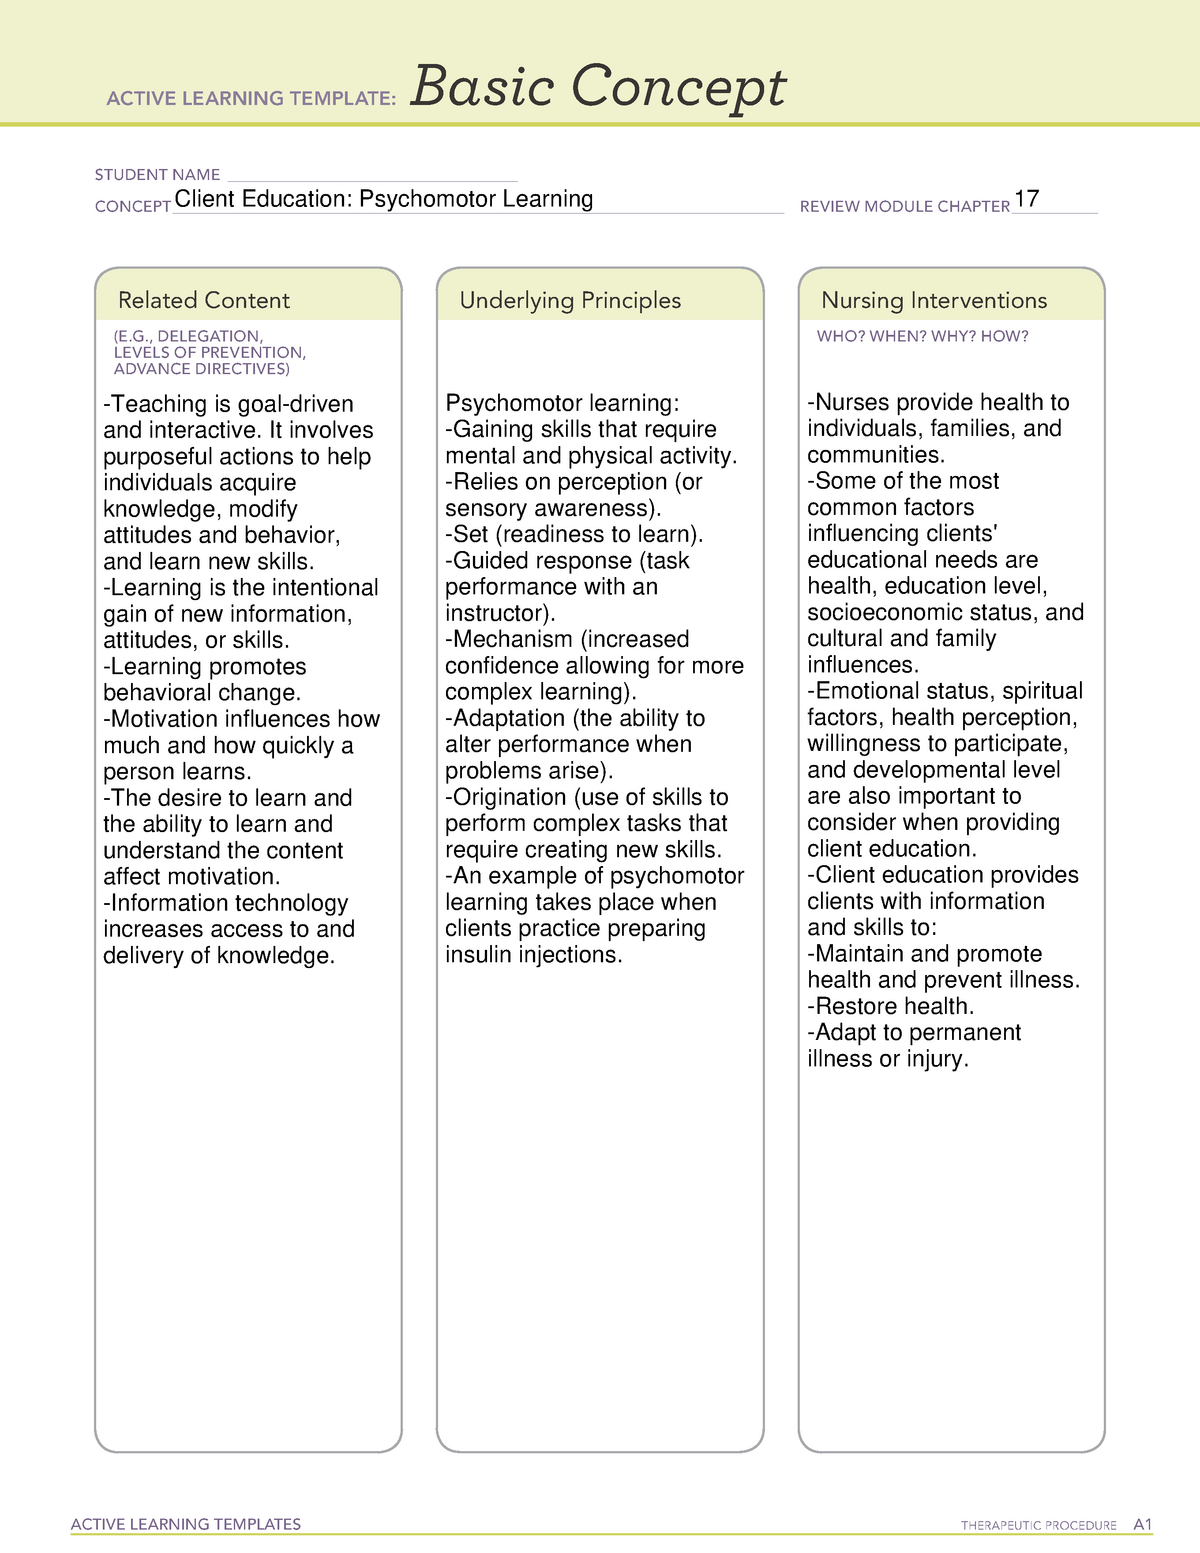 Active Learning Template Basic Concept ACTIVE LEARNING TEMPLATES